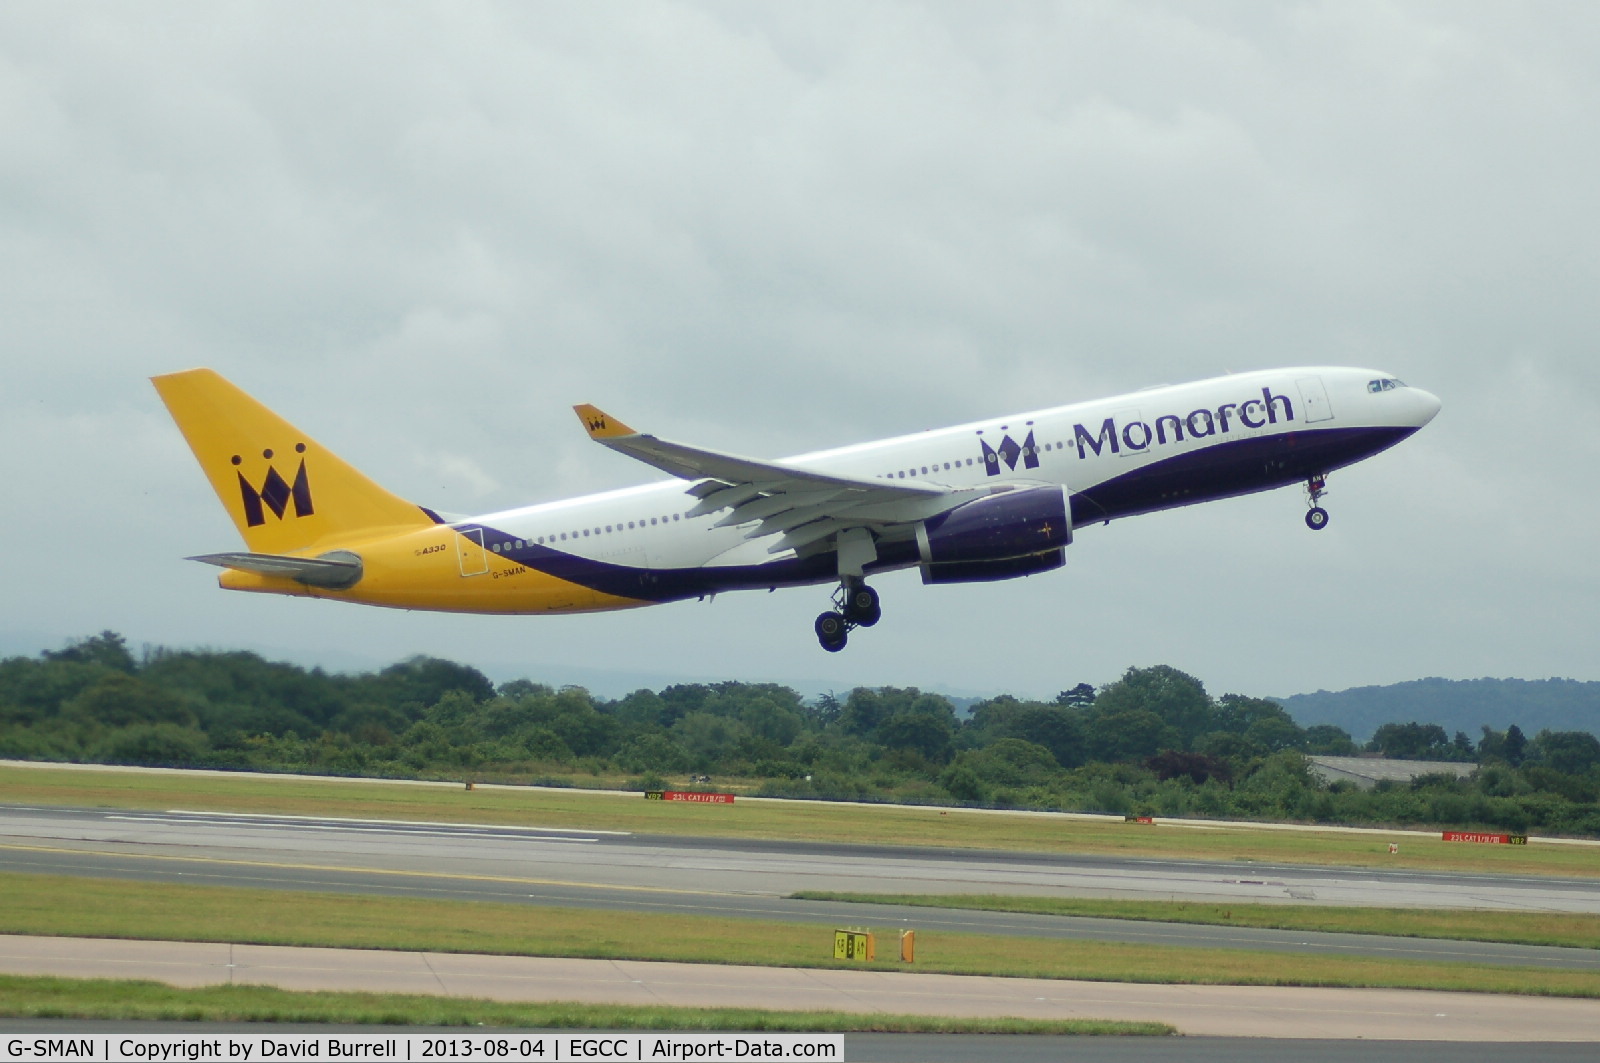 G-SMAN, 1999 Airbus A330-243 C/N 261, Monarch Airbus A330-243 taking off from Manchester Airport.